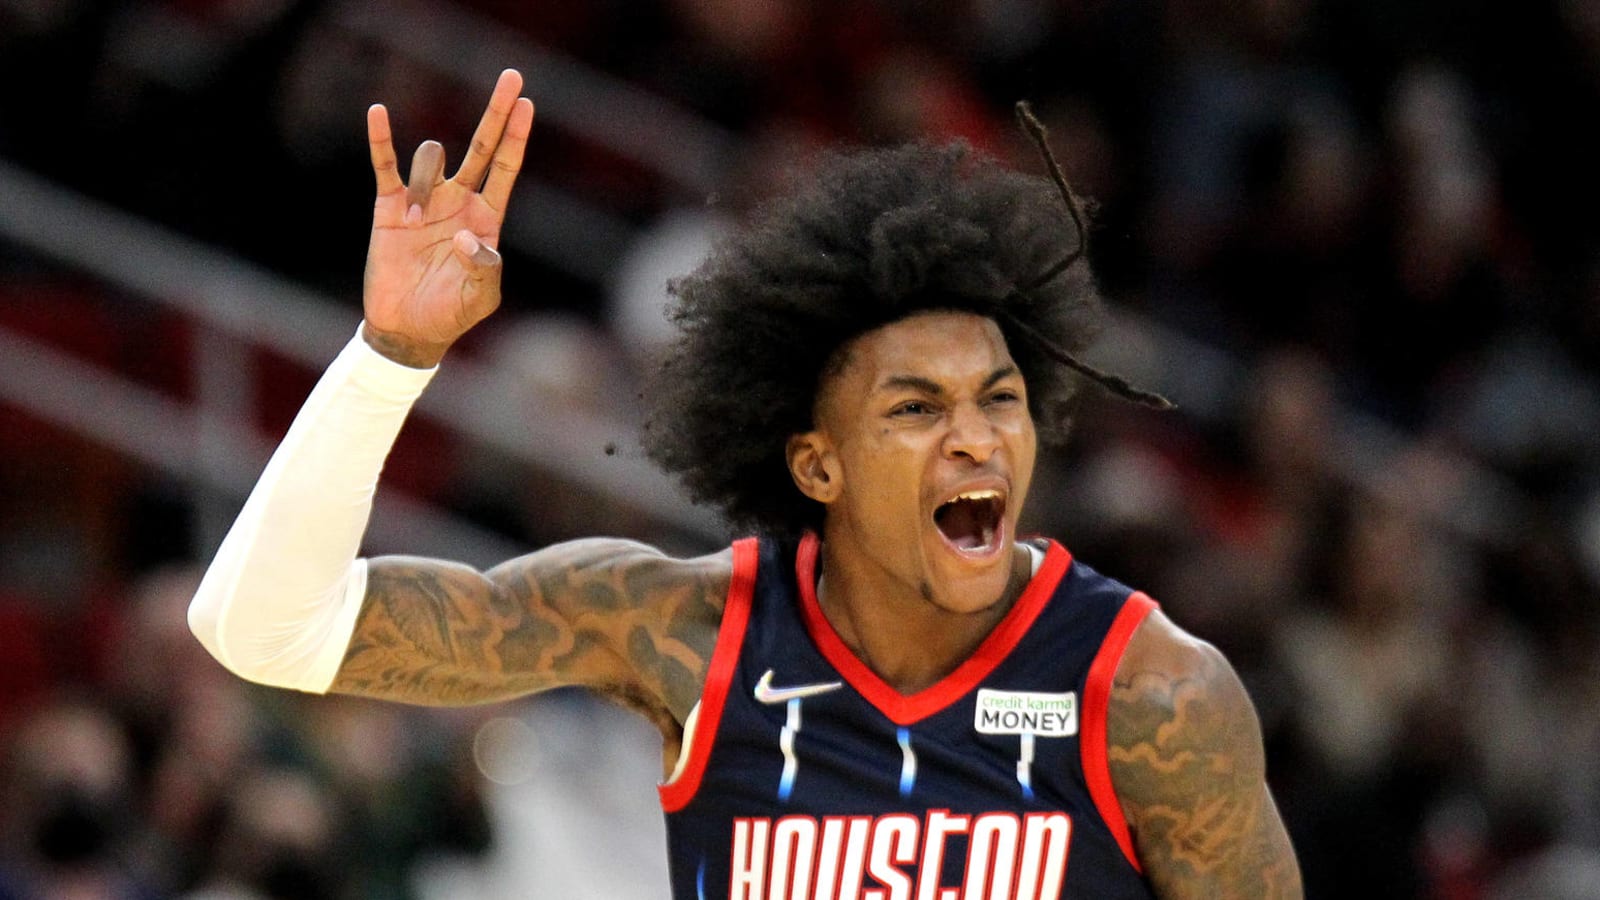 Kevin Porter Jr. calls his point-guard style 'Scoot ball' for the Rockets